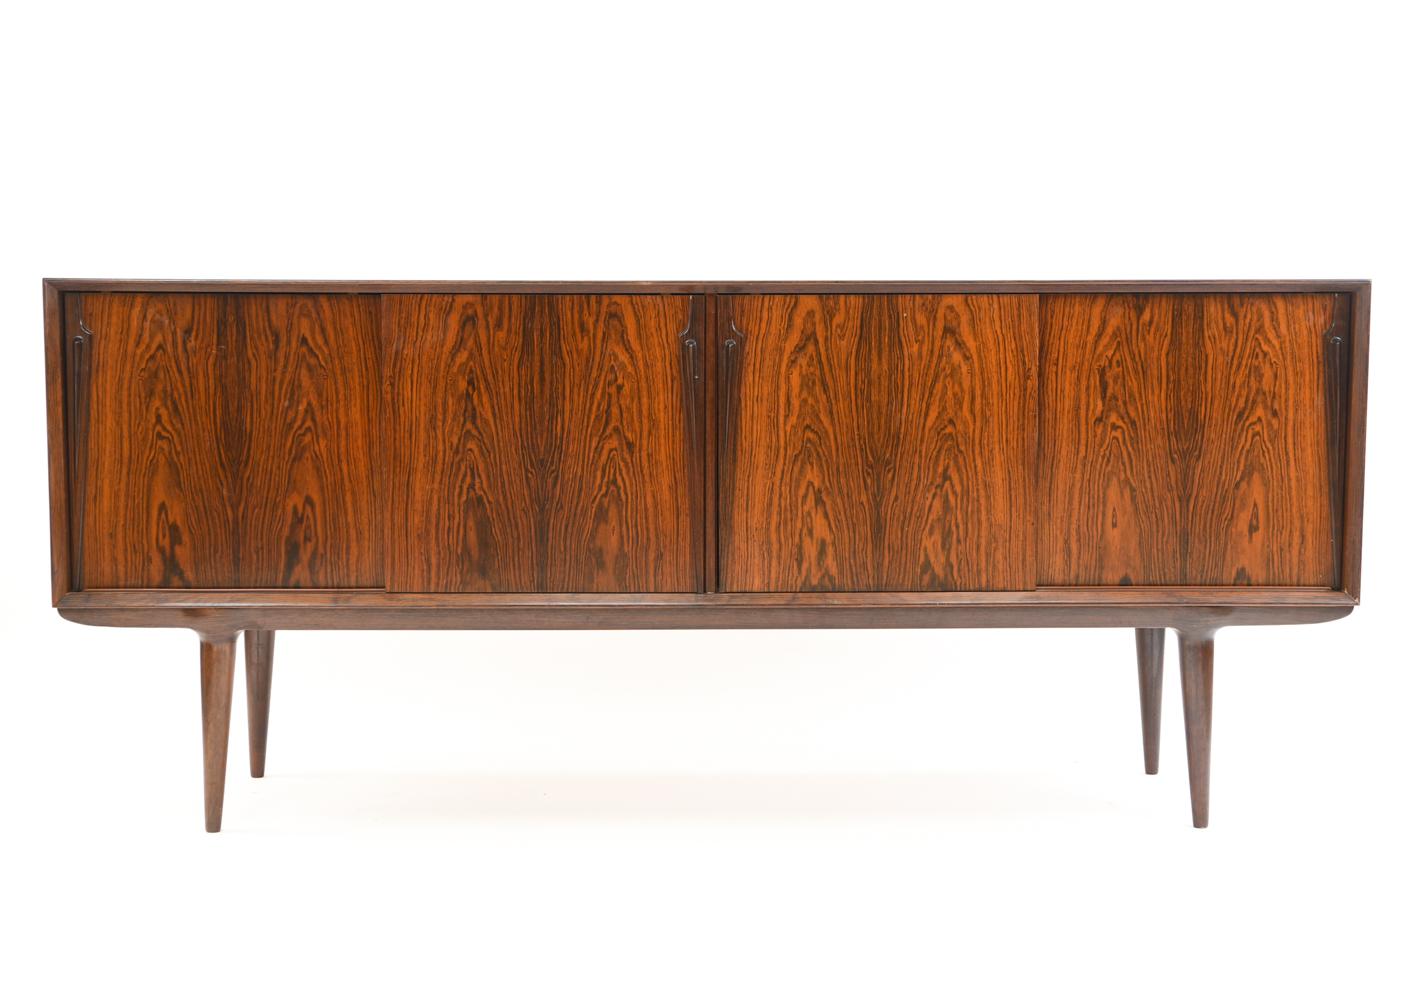 This gorgeous rosewood sideboard was designed by Gunni Omann for Omann Jr. The bevel-edged case sits on tapered legs and features four sliding doors with long organic handles. Inside are two adjustable shelves and, to the left, six felt-lined tray